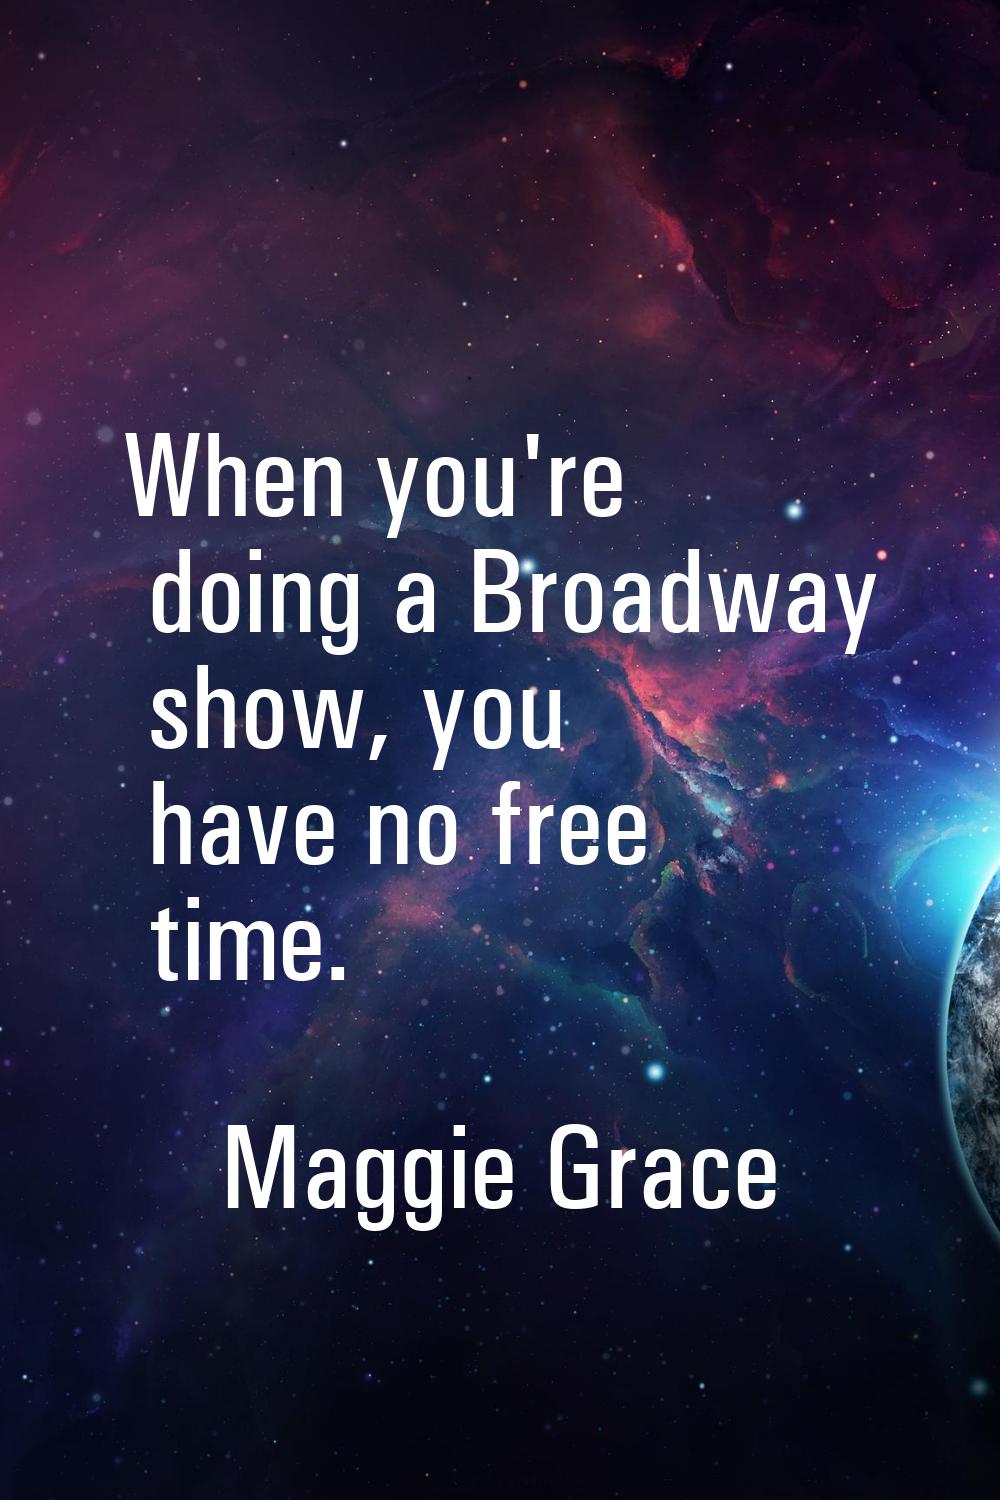 When you're doing a Broadway show, you have no free time.